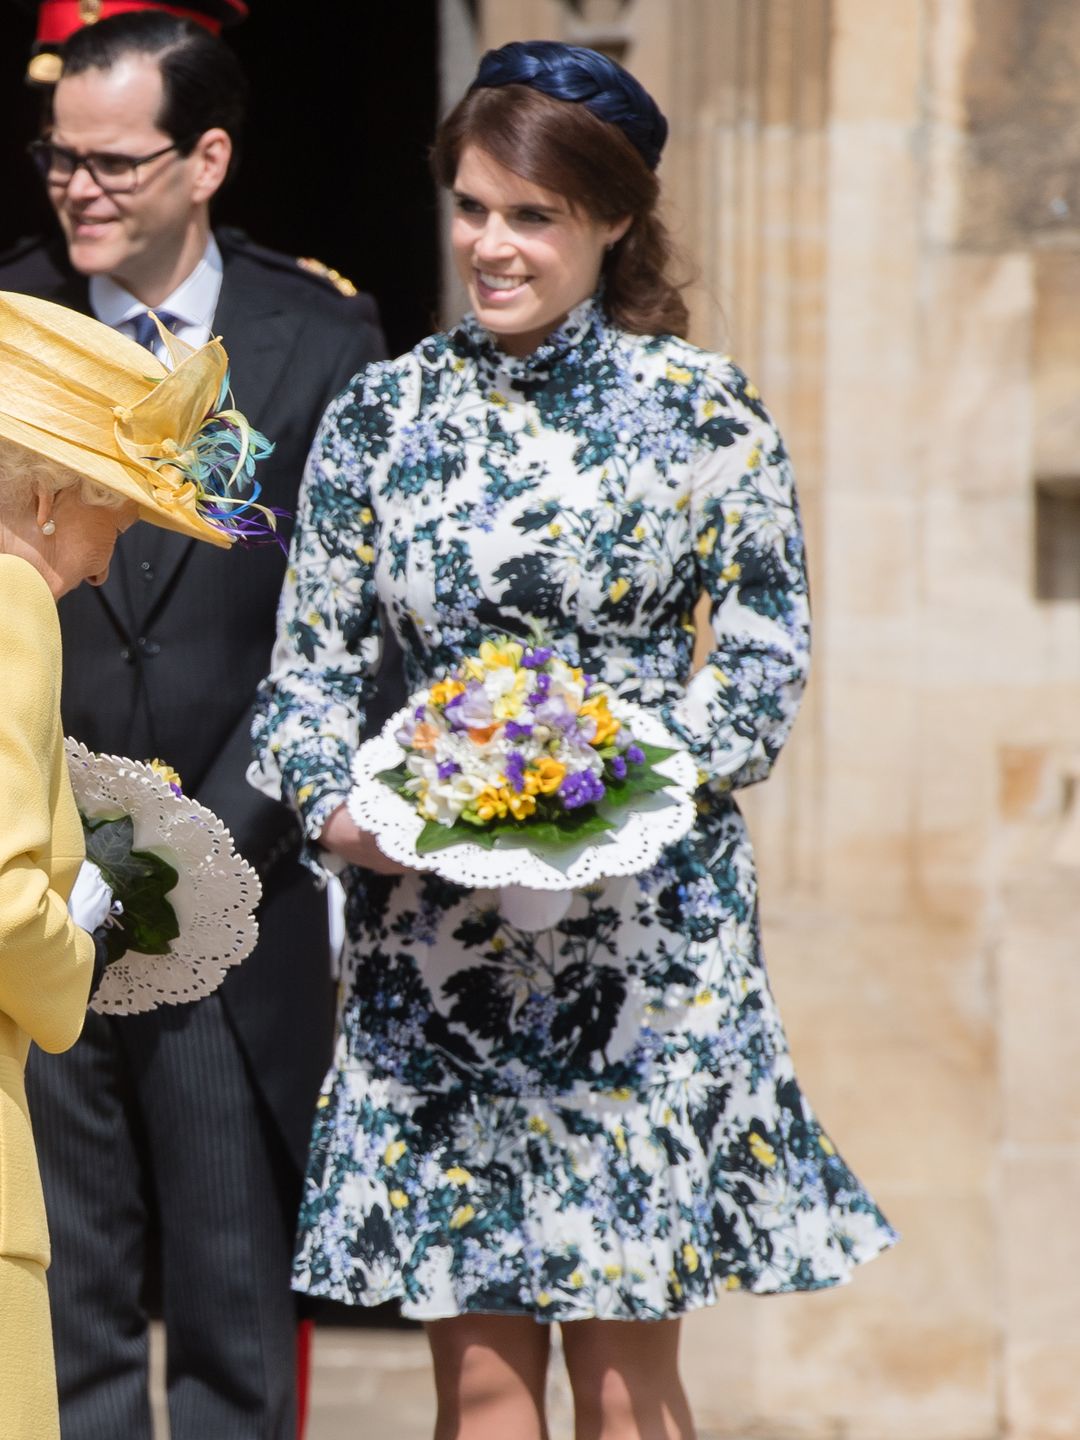 Princess Eugenie cose a floral short dress to attend the traditional Royal Maundy Service at St George's Chapel in 2019